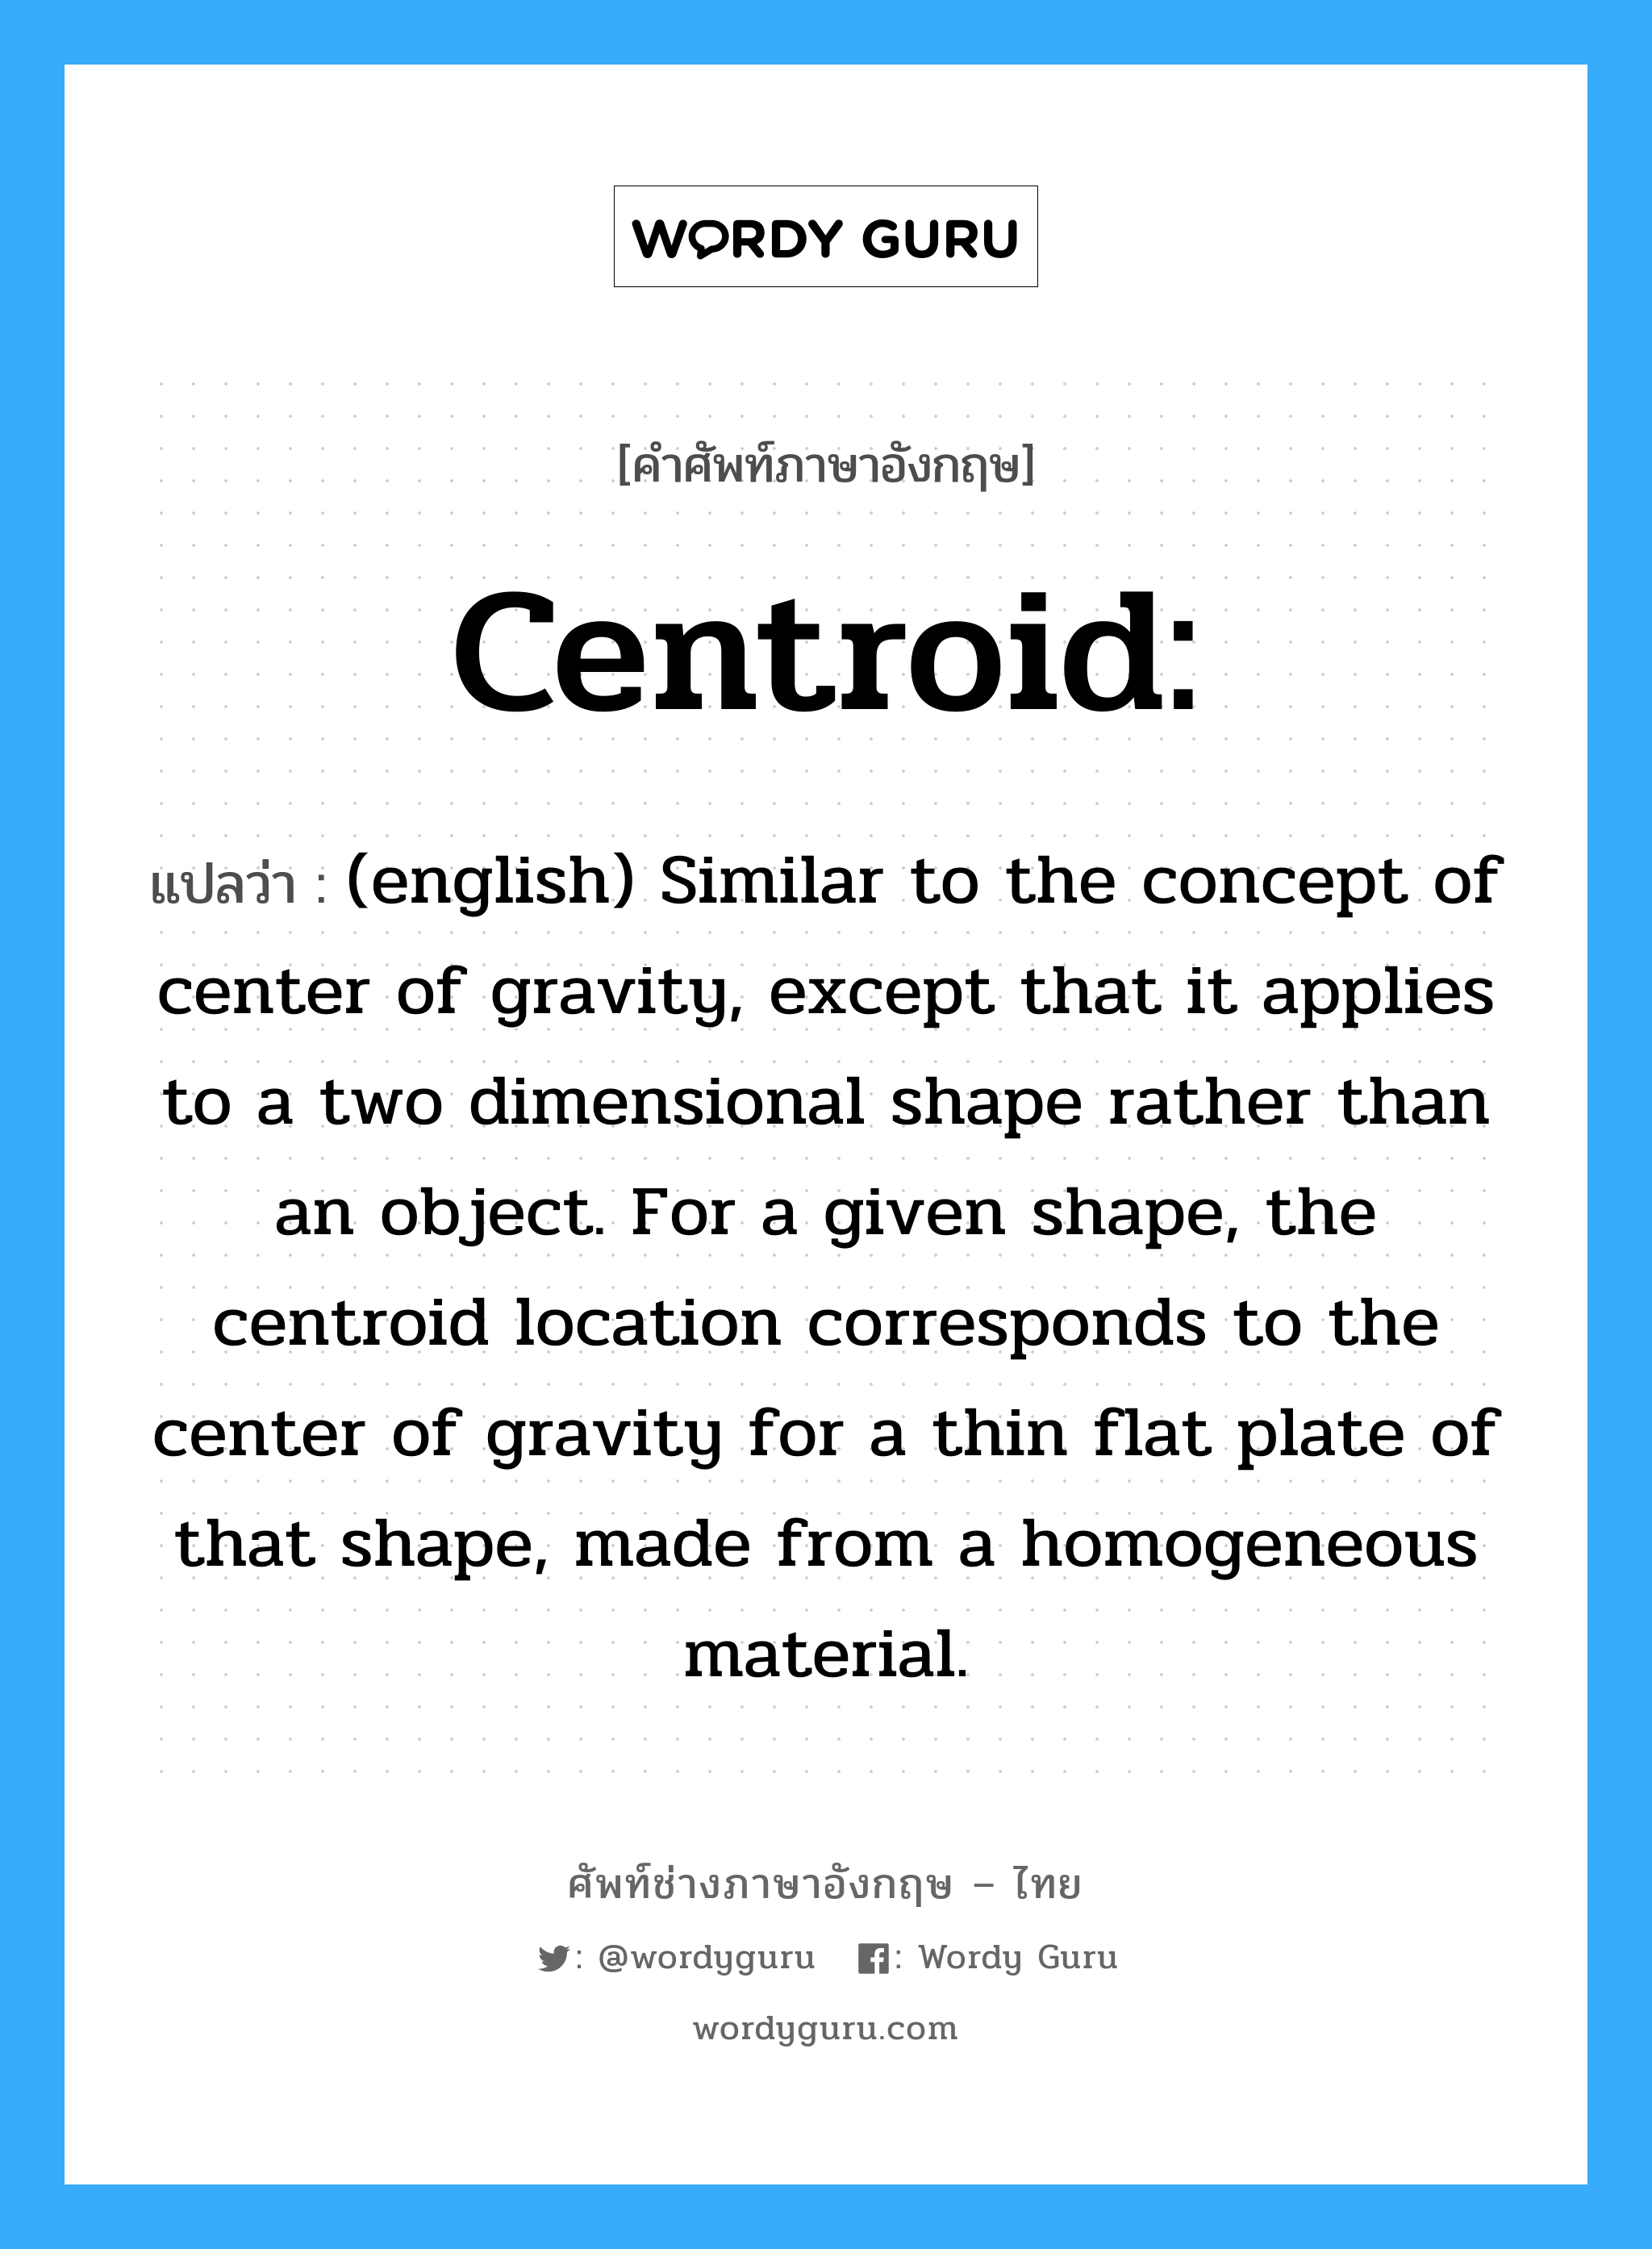 (english) Similar to the concept of center of gravity, except that it applies to a two dimensional shape rather than an object. For a given shape, the centroid location corresponds to the center of gravity for a thin flat plate of that shape, made from a homogeneous material. ภาษาอังกฤษ?, คำศัพท์ช่างภาษาอังกฤษ - ไทย (english) Similar to the concept of center of gravity, except that it applies to a two dimensional shape rather than an object. For a given shape, the centroid location corresponds to the center of gravity for a thin flat plate of that shape, made from a homogeneous material. คำศัพท์ภาษาอังกฤษ (english) Similar to the concept of center of gravity, except that it applies to a two dimensional shape rather than an object. For a given shape, the centroid location corresponds to the center of gravity for a thin flat plate of that shape, made from a homogeneous material. แปลว่า Centroid: